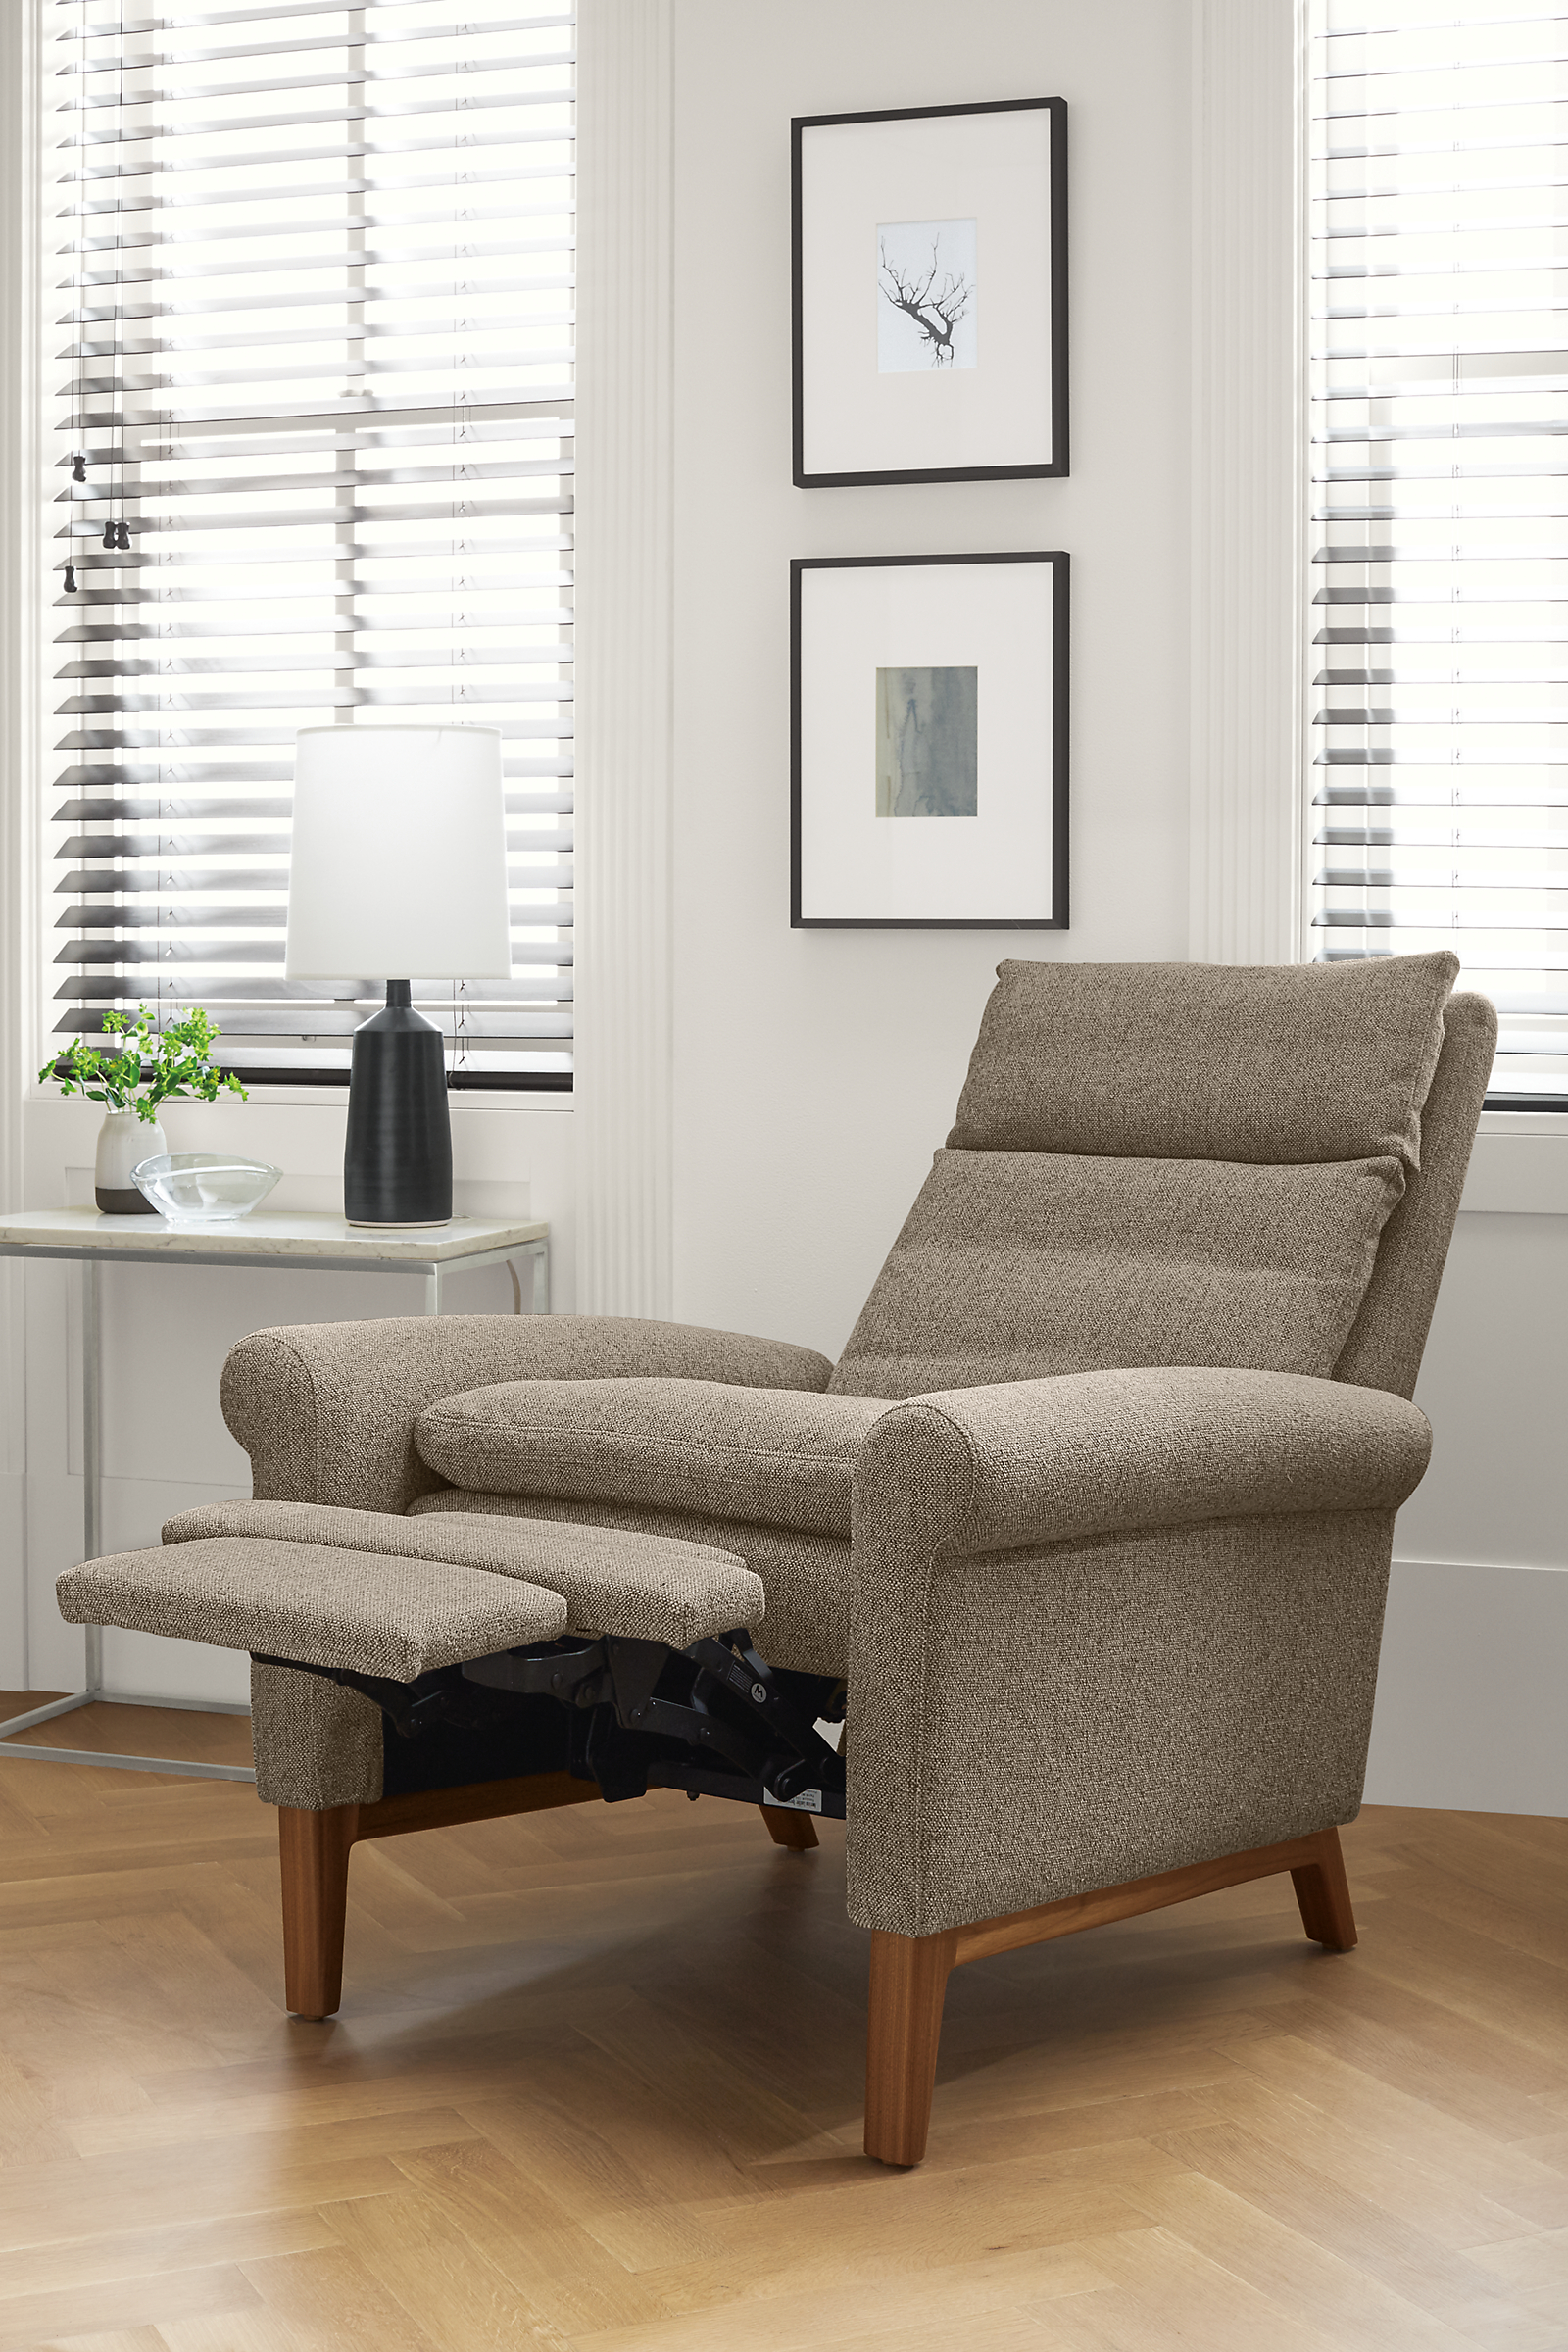 Detail of Isaac rolled-arm recliner with wood base and foot rest extended.